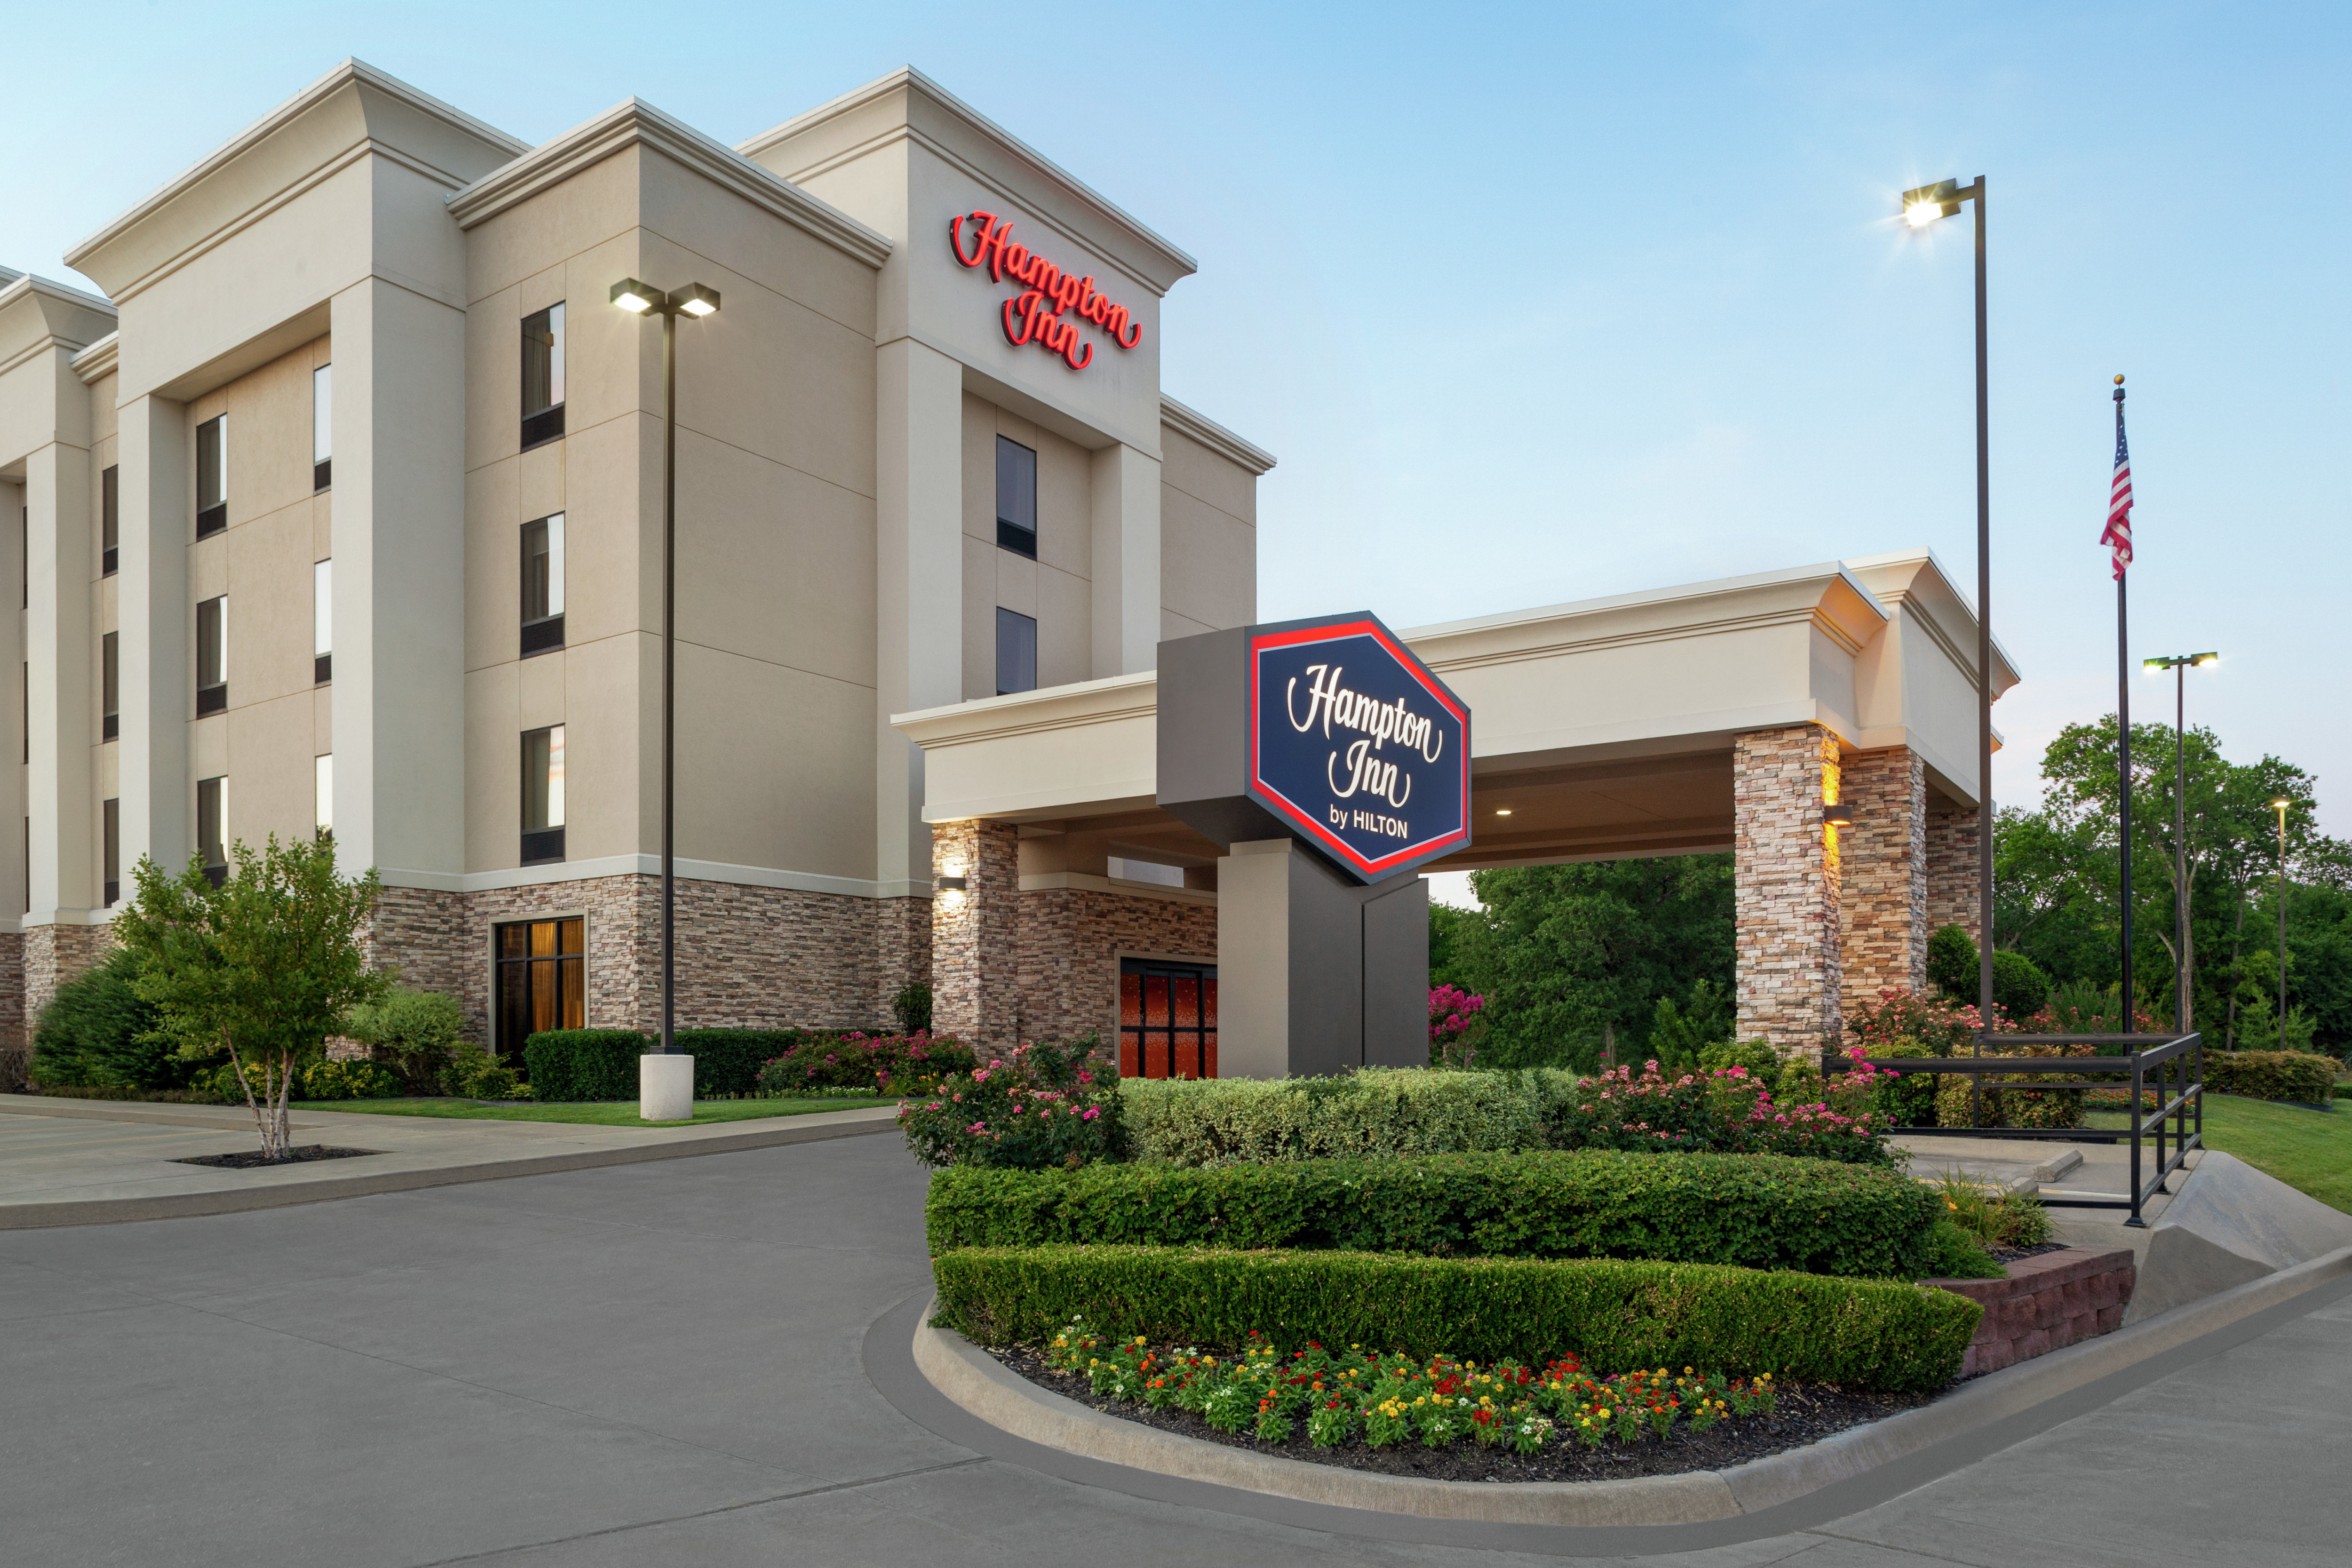 Welcoming Hampton Inn hotel exterior featuring lush landscaping, porte cochere, and dusk sky.